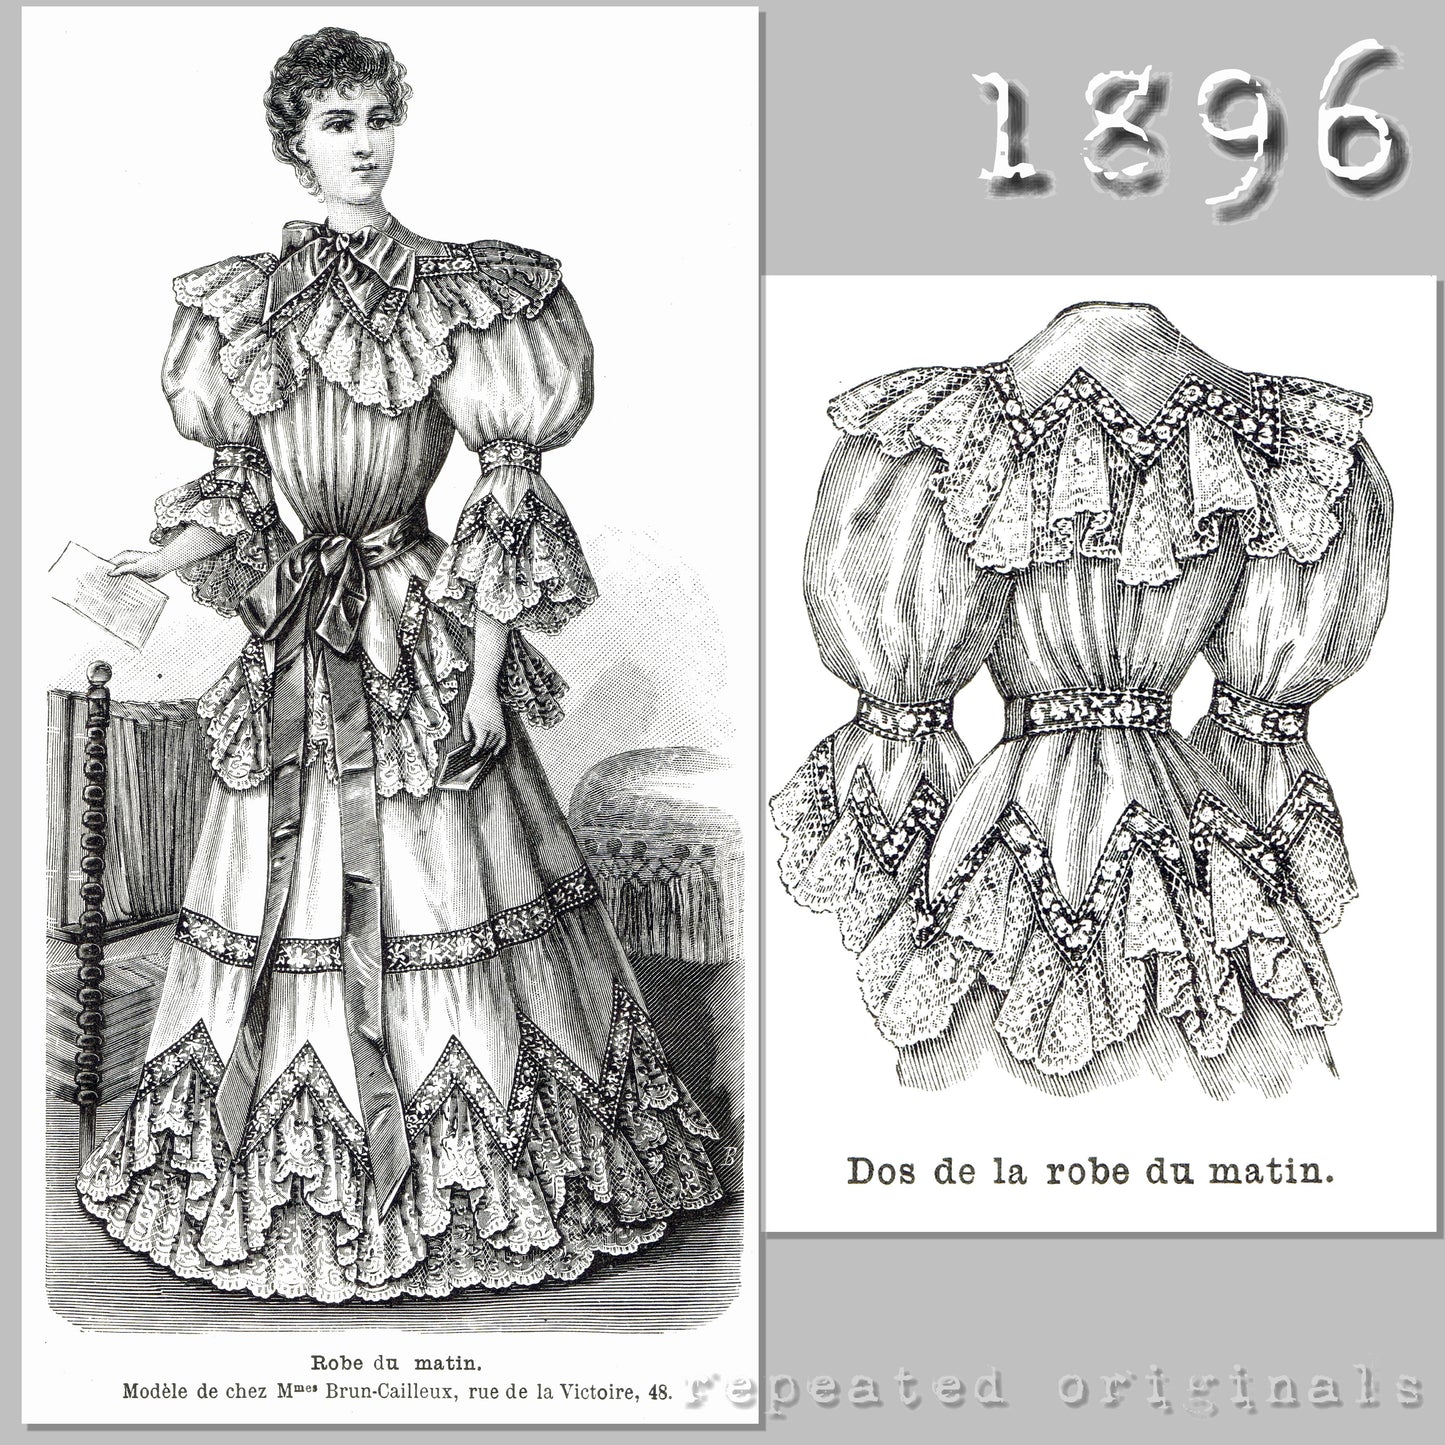 1896 Morning Dress, Lingerie - Bodice and Skirt Sewing Pattern - INSTANT DOWNLOAD PDF